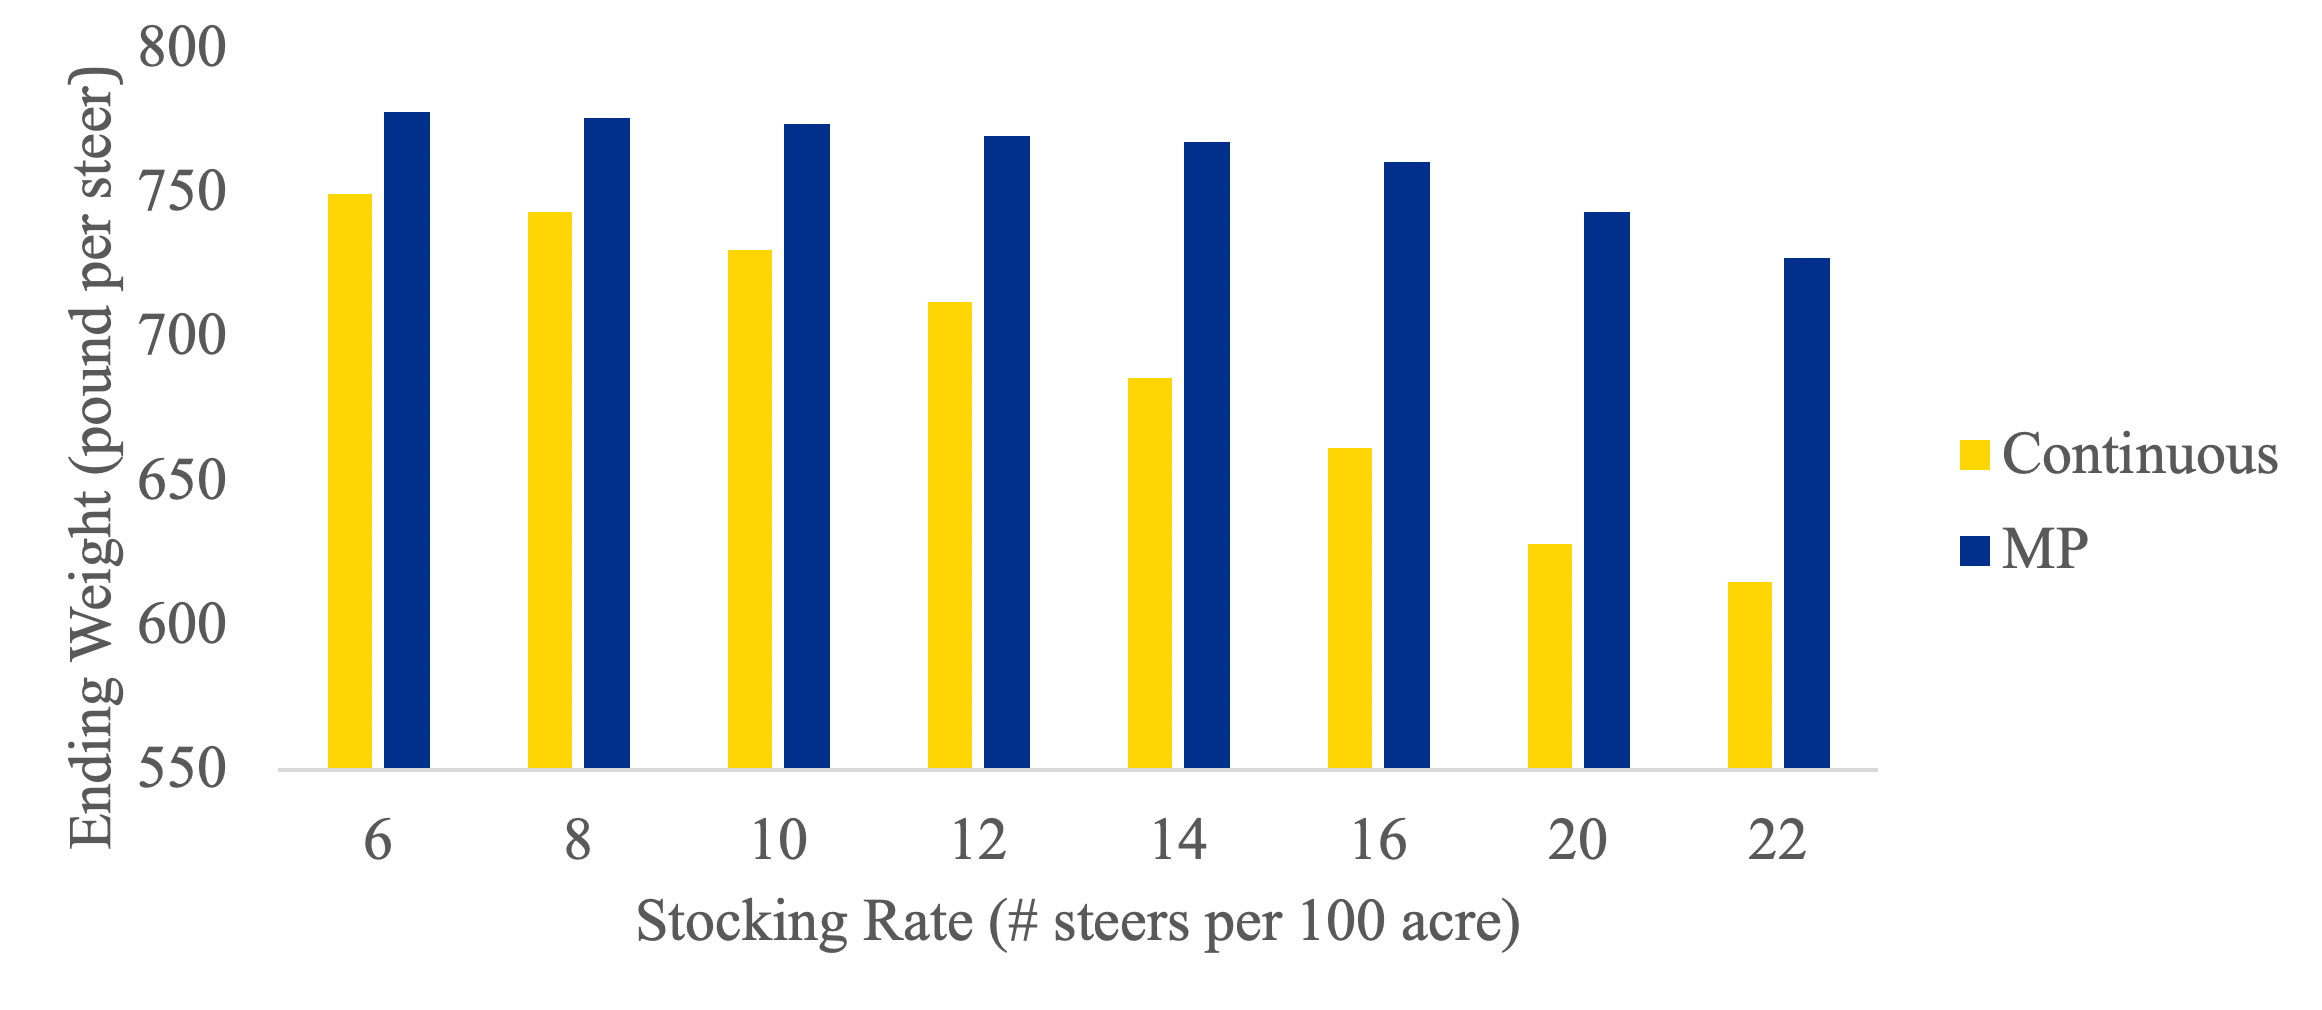 A bar graph comparing steer ending weight between continuous grazing (yellow bar) and MP grazing (blue bar). In all instances, MP grazing leads to higher ending weights compared to continuous grazing.For a complete description, call SDSU Extension at 605-688-6729.